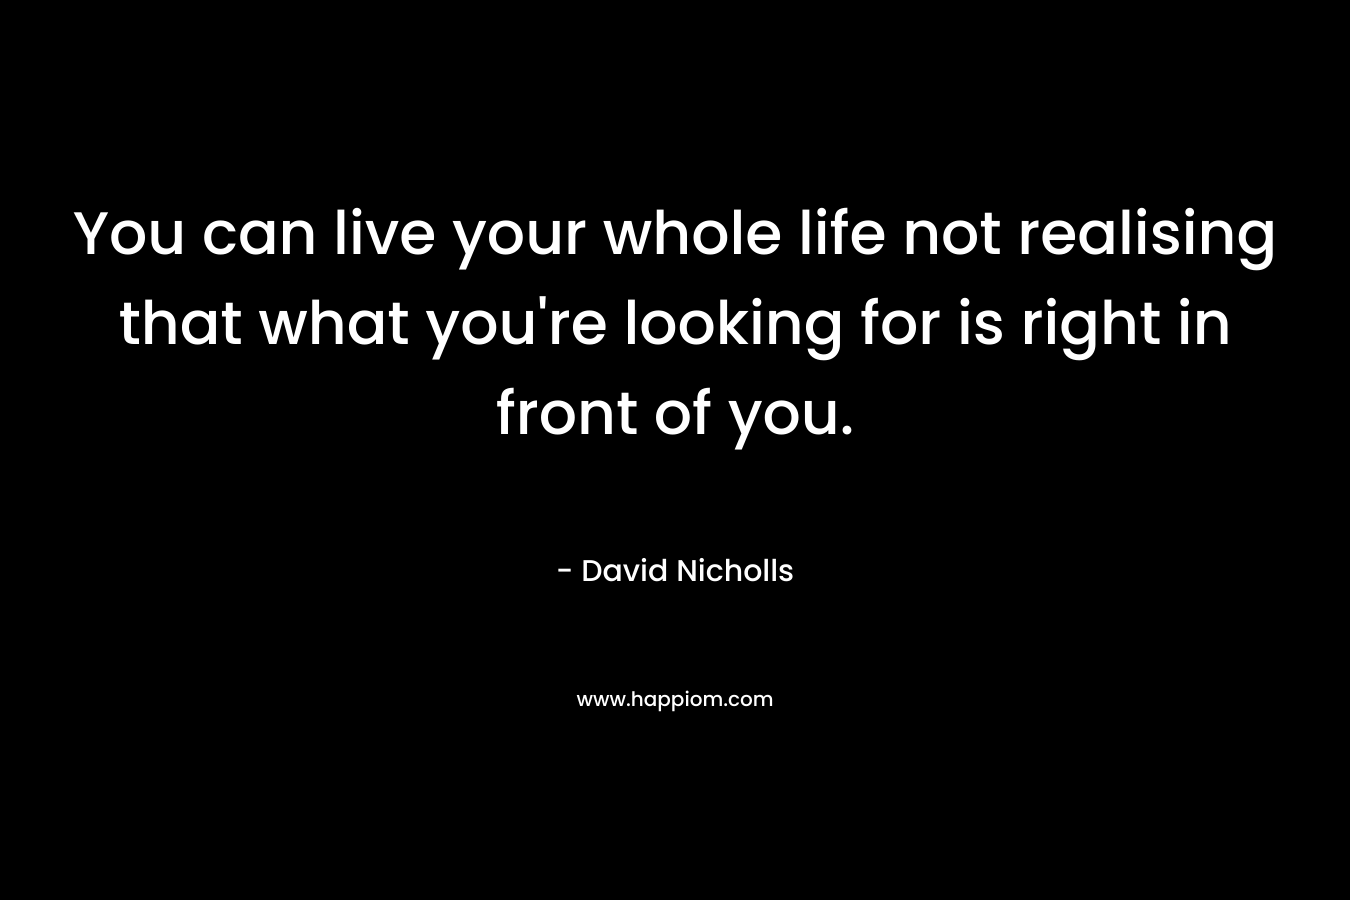 You can live your whole life not realising that what you're looking for is right in front of you.